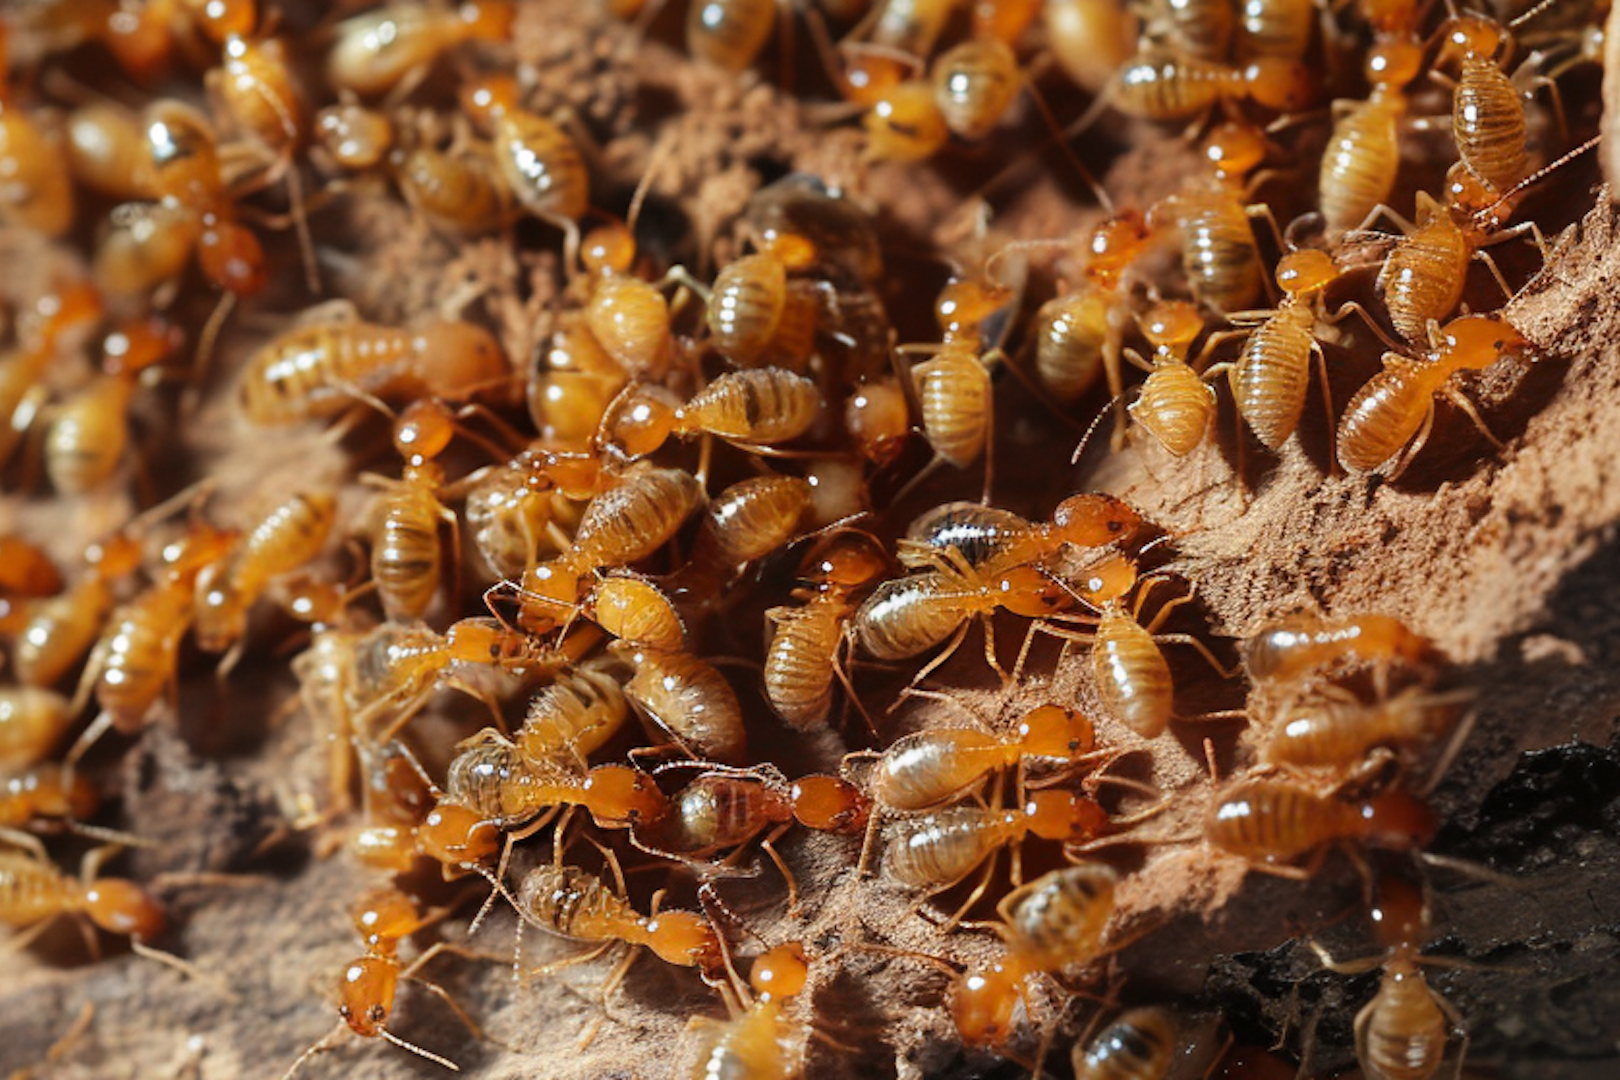 Termite swarmers are termites who leave their colonies to find mates and form new colonies